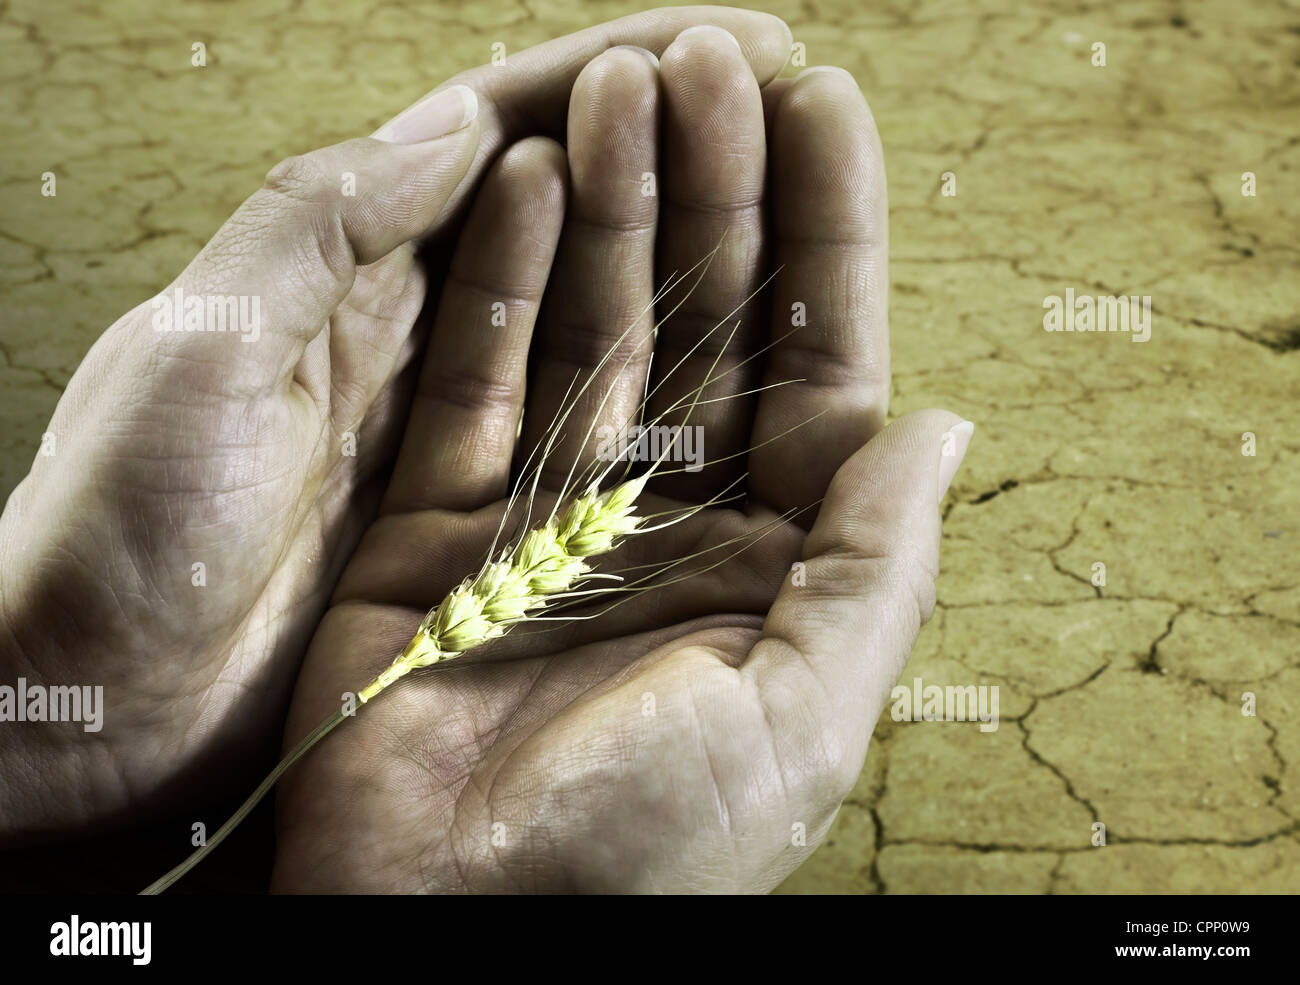 Hunger starvation problem on the earth with wheat and caring hands Stock Photo